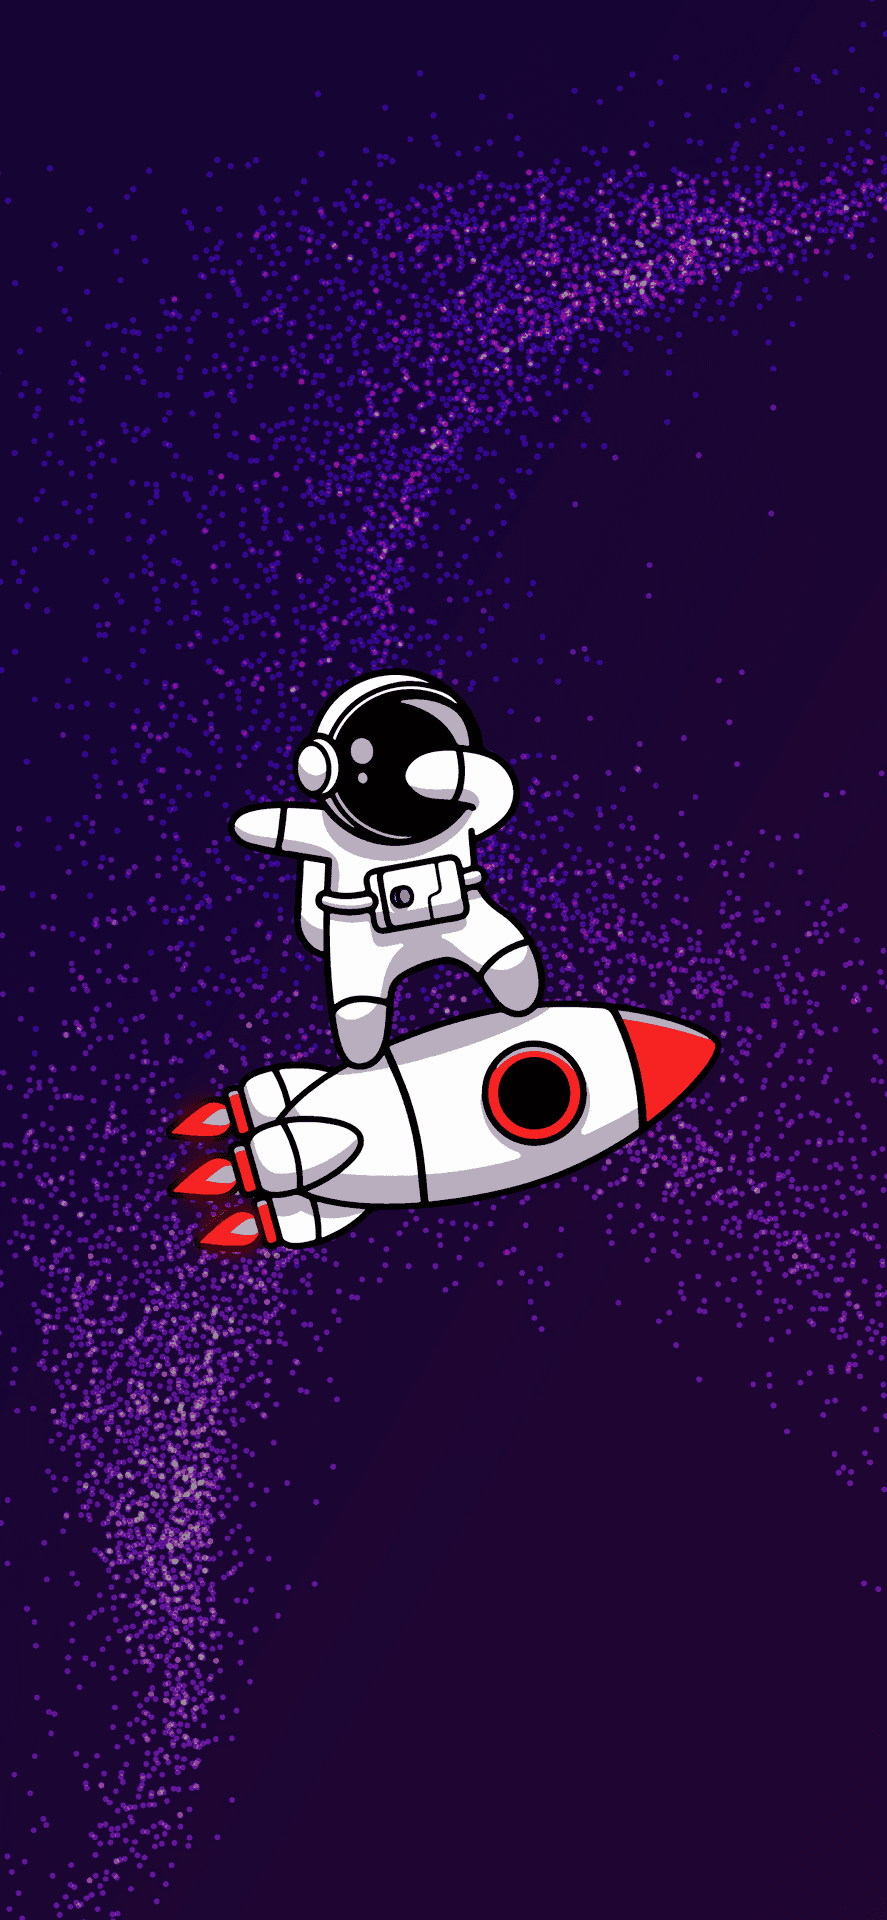 "a Lone Astronaut Floating In The Vast Expanse Of Outer Space"